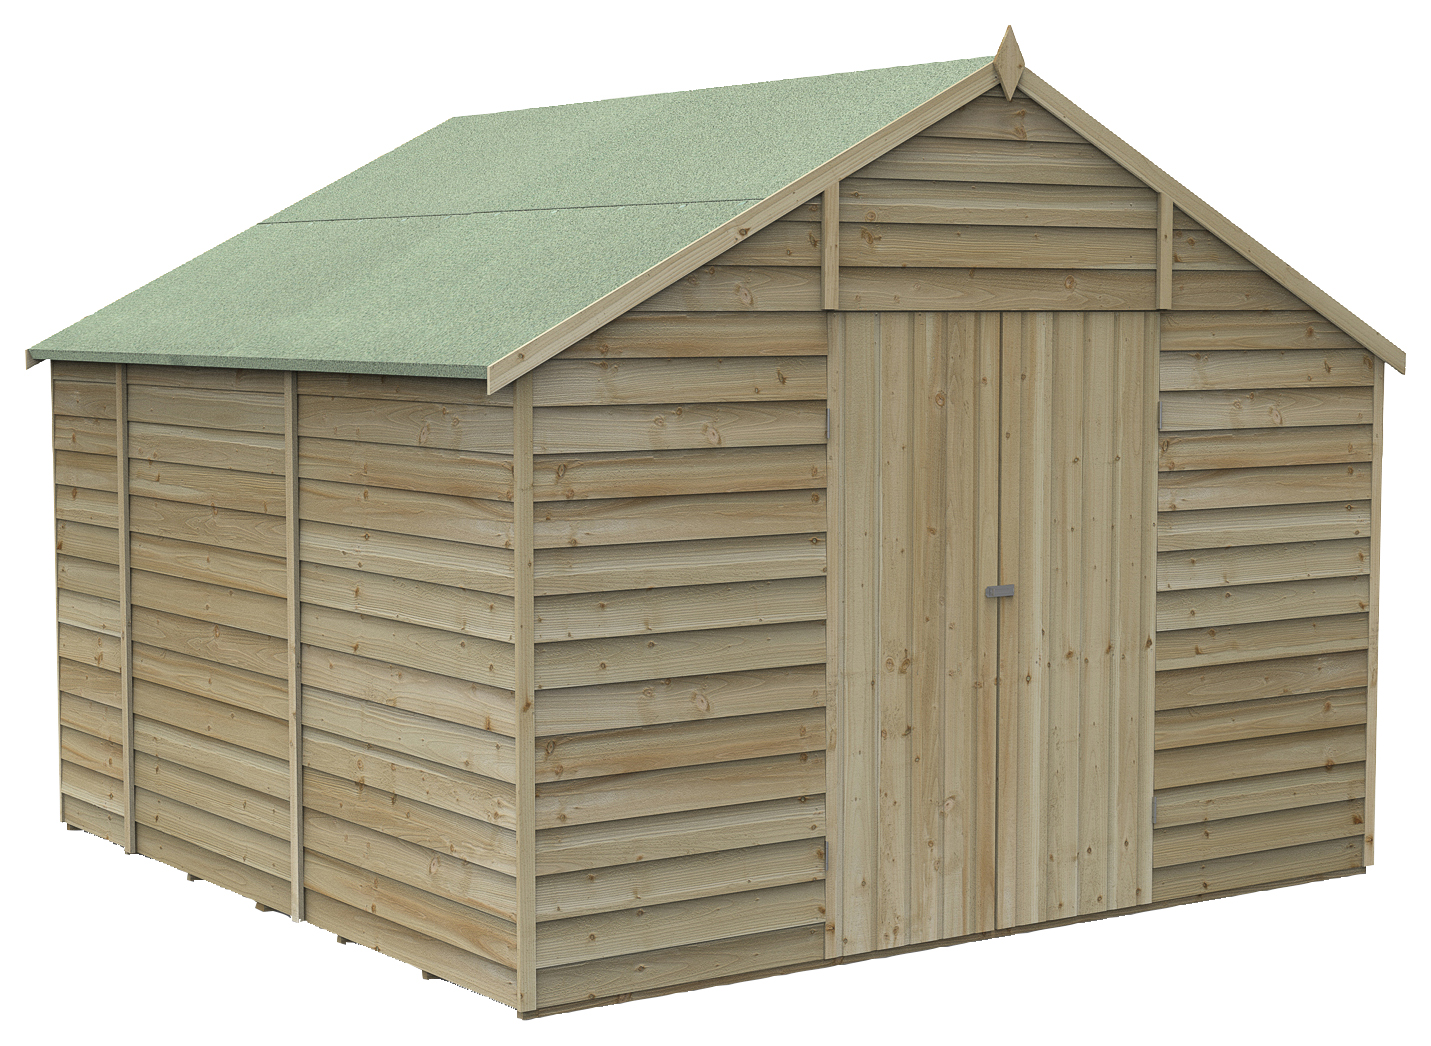 Forest Garden 10 x 10ft 4Life Apex Overlap Pressure Treated Double Door Windowless Shed with Assembly